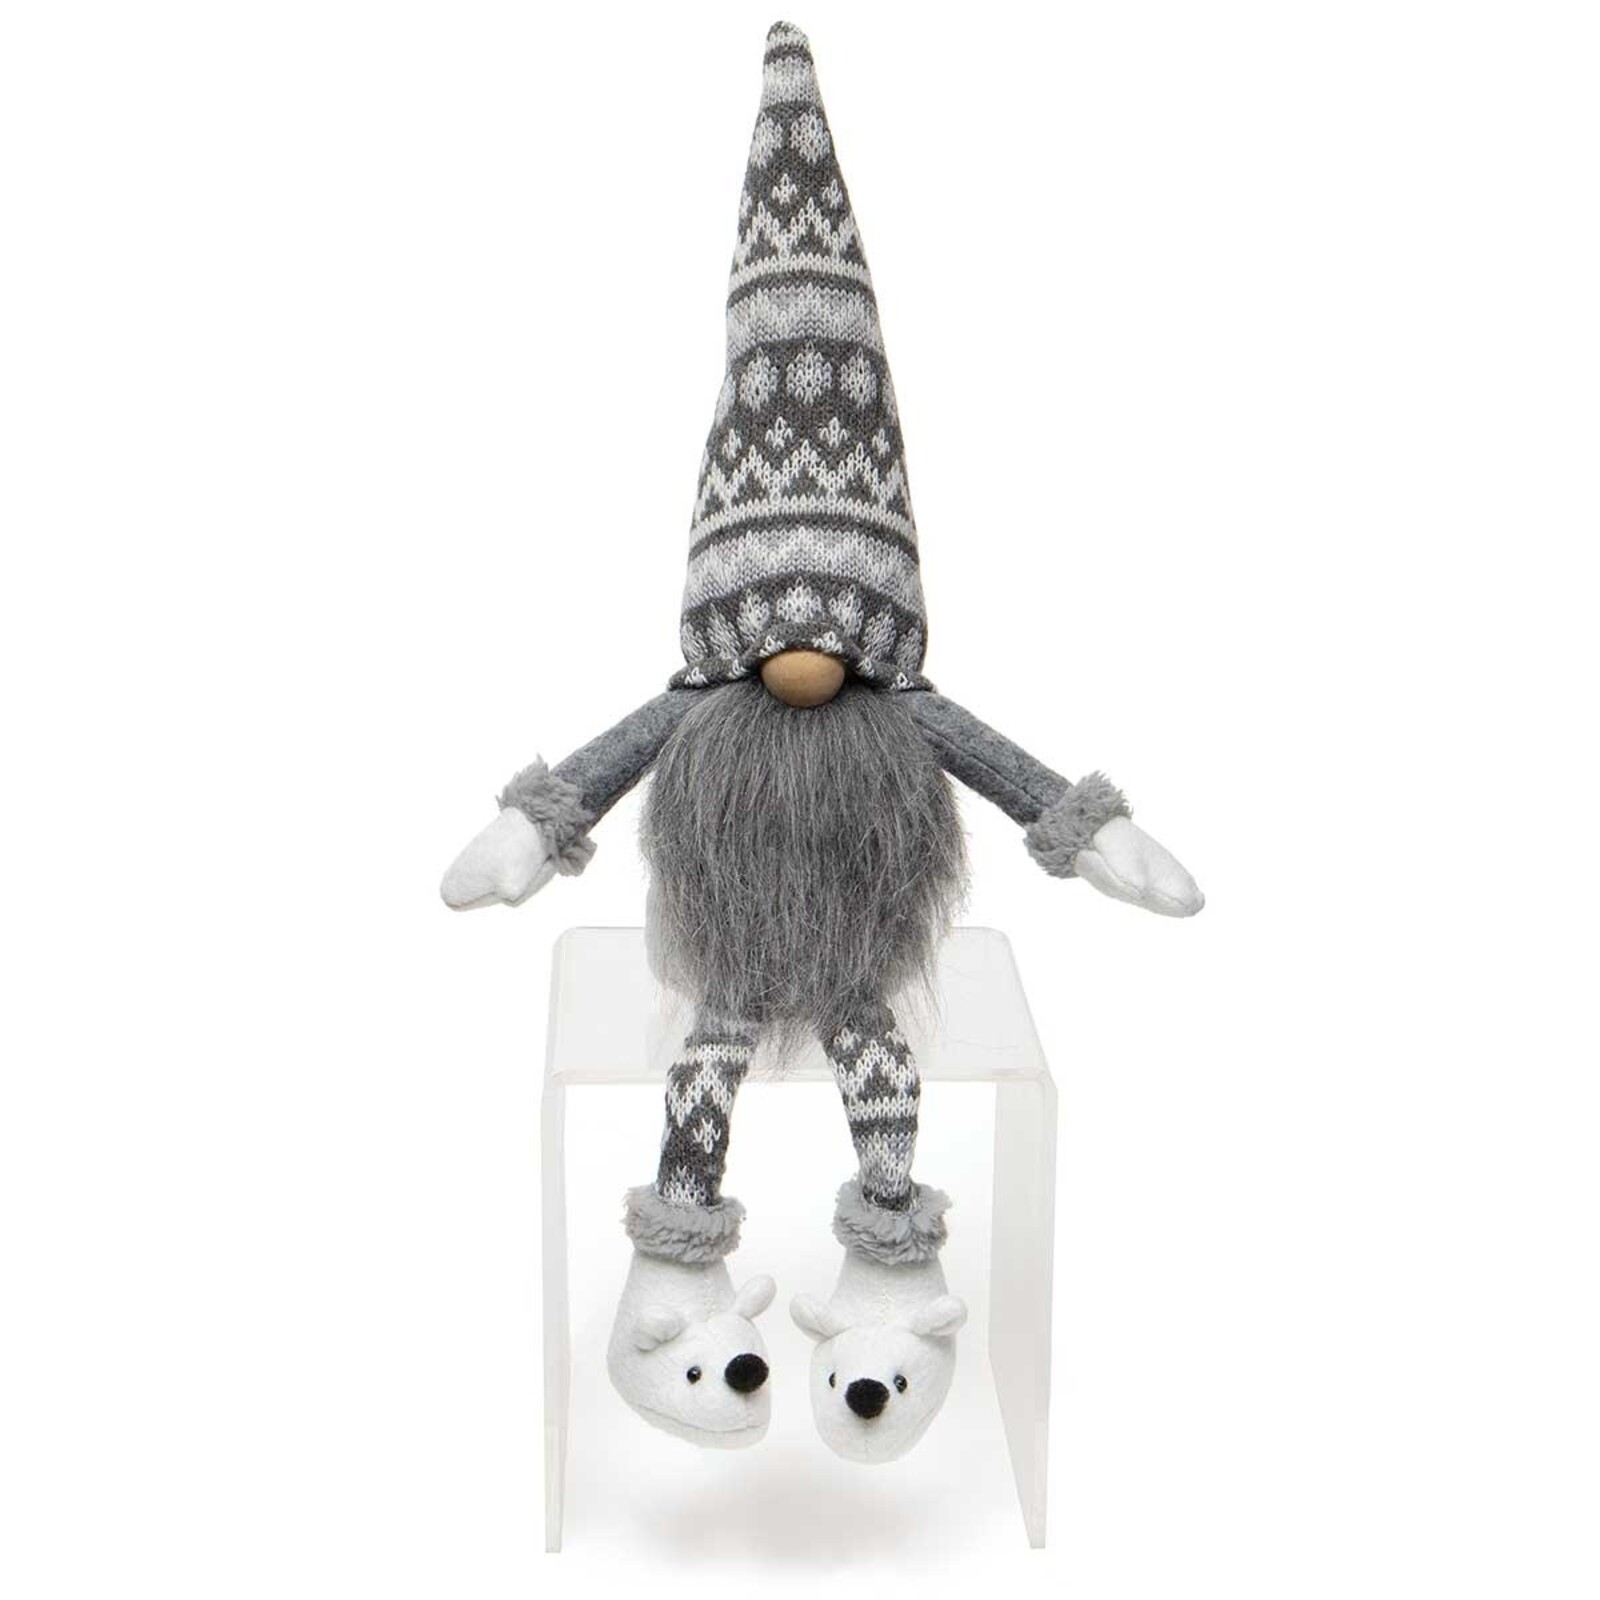 Meravic POLI BEAR 18" GNOME with  BOOTS  R8623 loading=